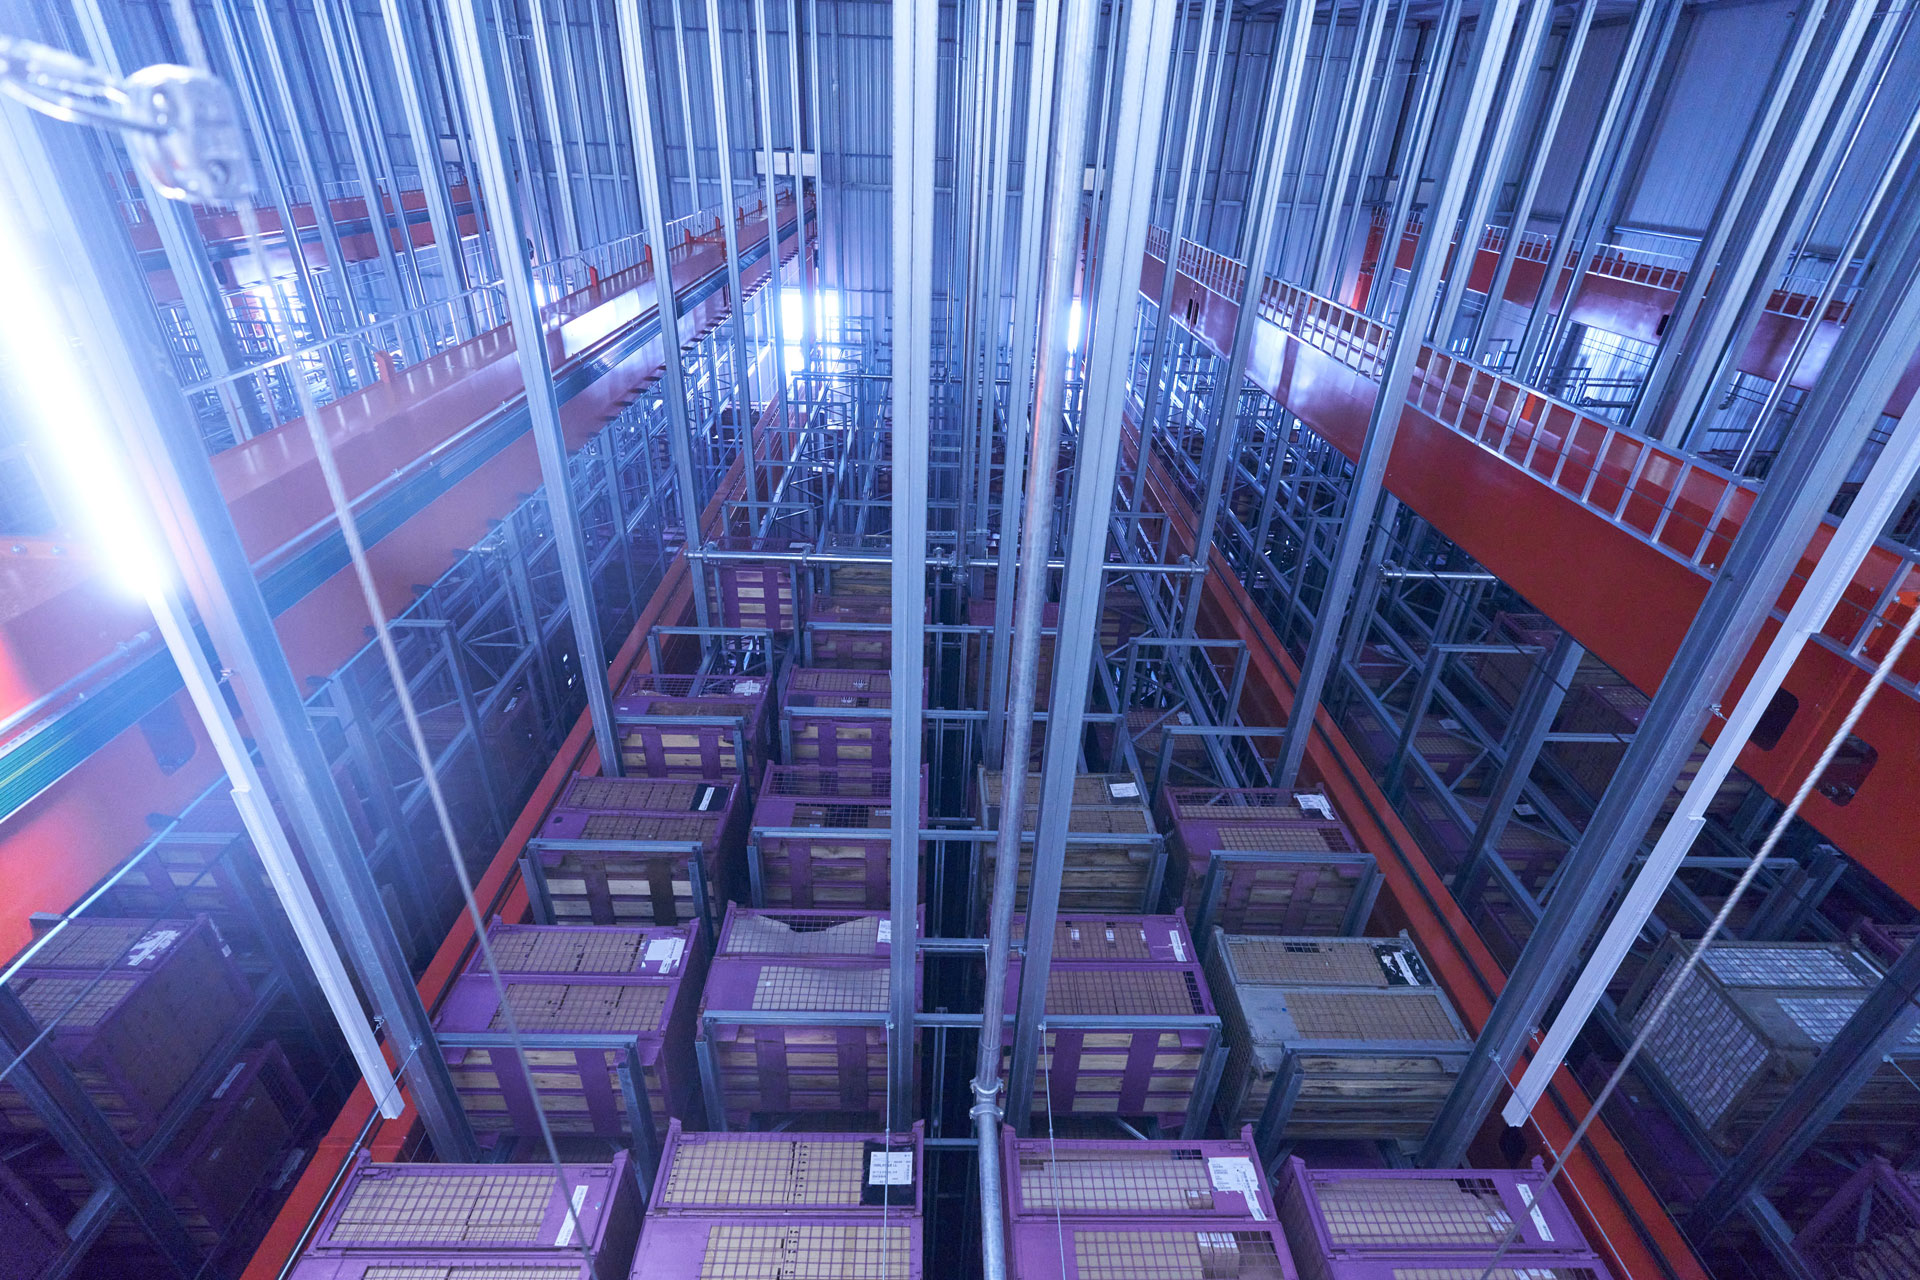 View from above into a high-bay warehouse with lattice boxes